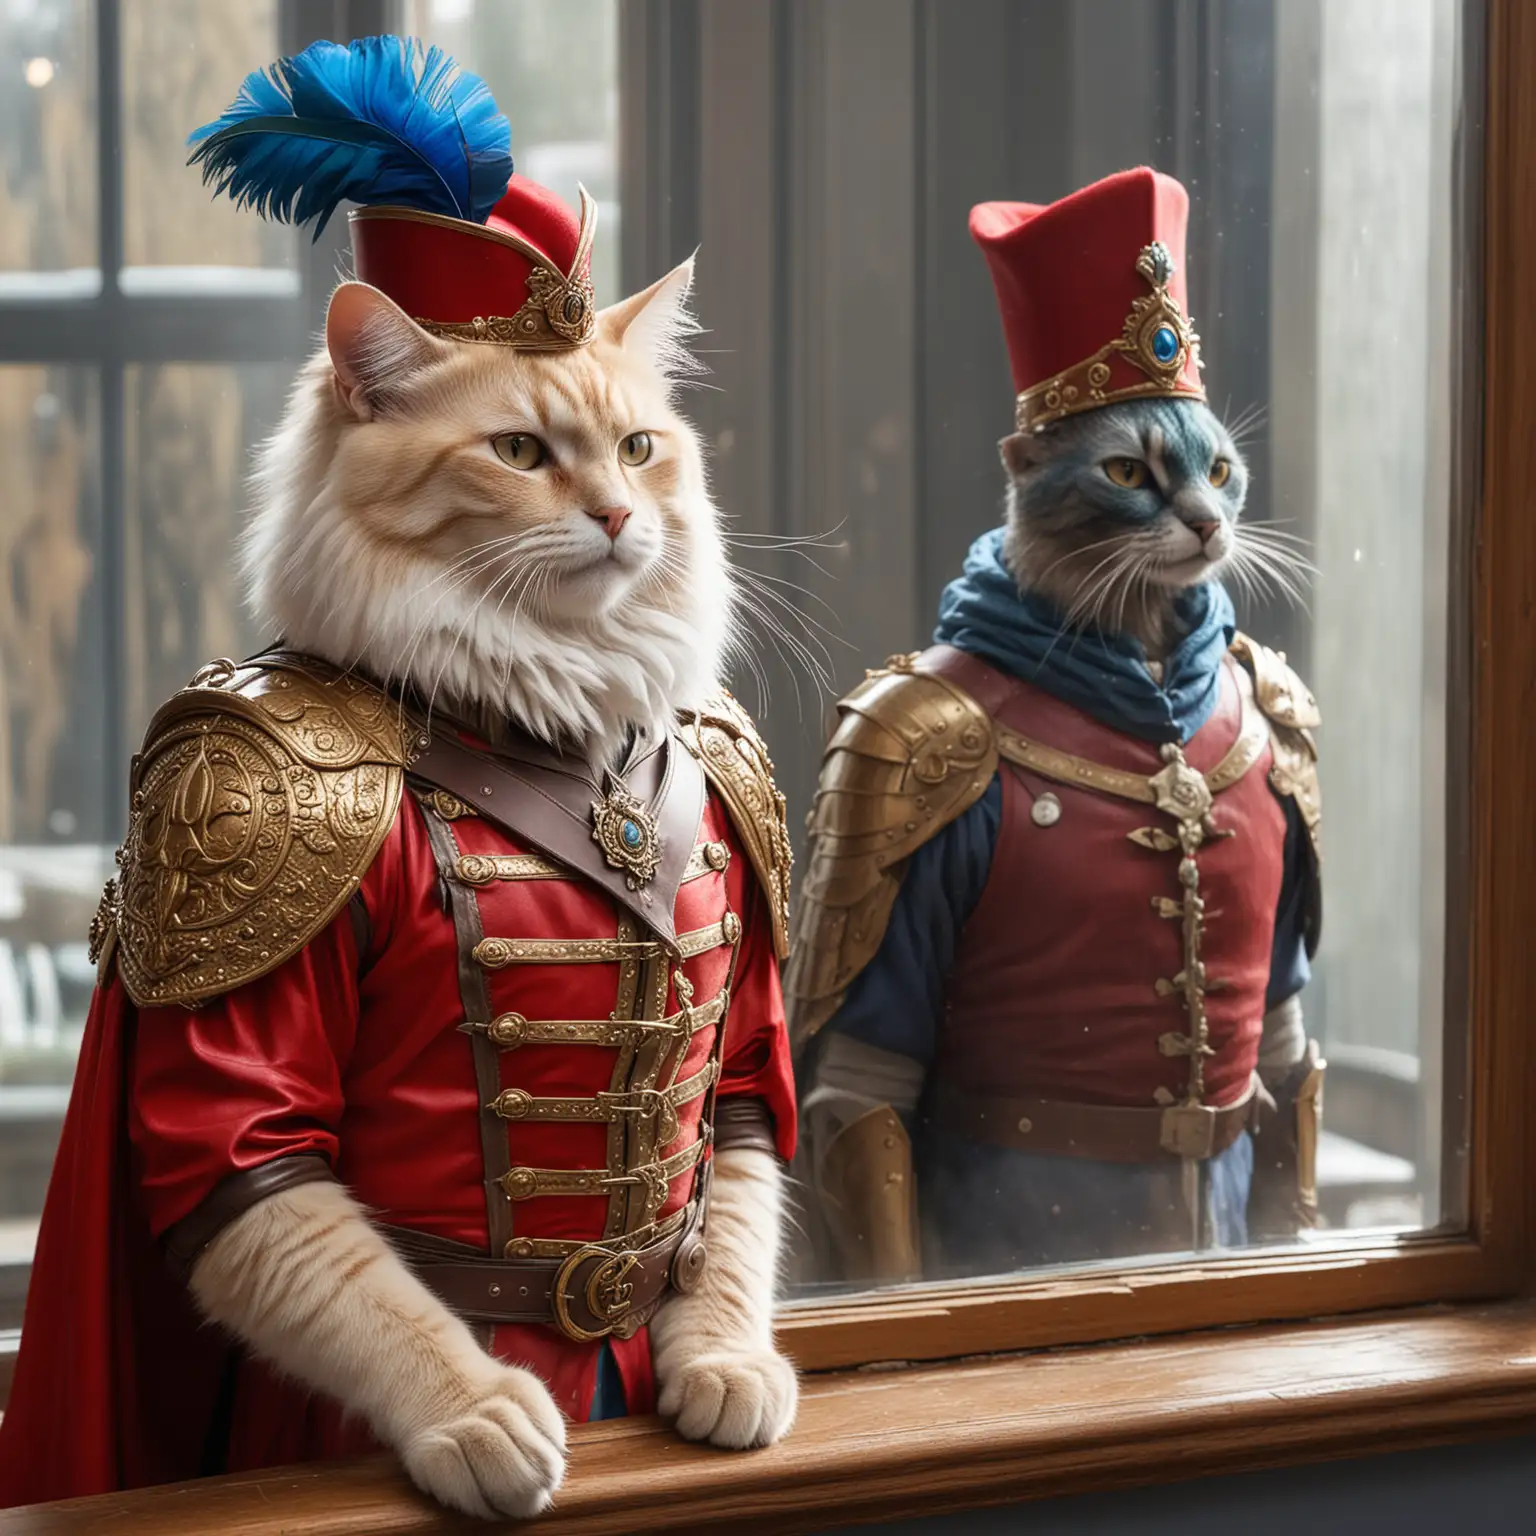  Two catpeople lookat eachotherthrougha glass window,  , Mordenkainen the buff blonde catperson warrior stands facing his rival,sir catimus the white and gray catperson rogue , the stare at each other intinsely through an invisible force field. Mordenkainen the blonde catman wears red leather armor, sir catimus the white with gray patches lean catperson wears royal gaurd vestments and a blue robinhood_hat with a single peacock feather